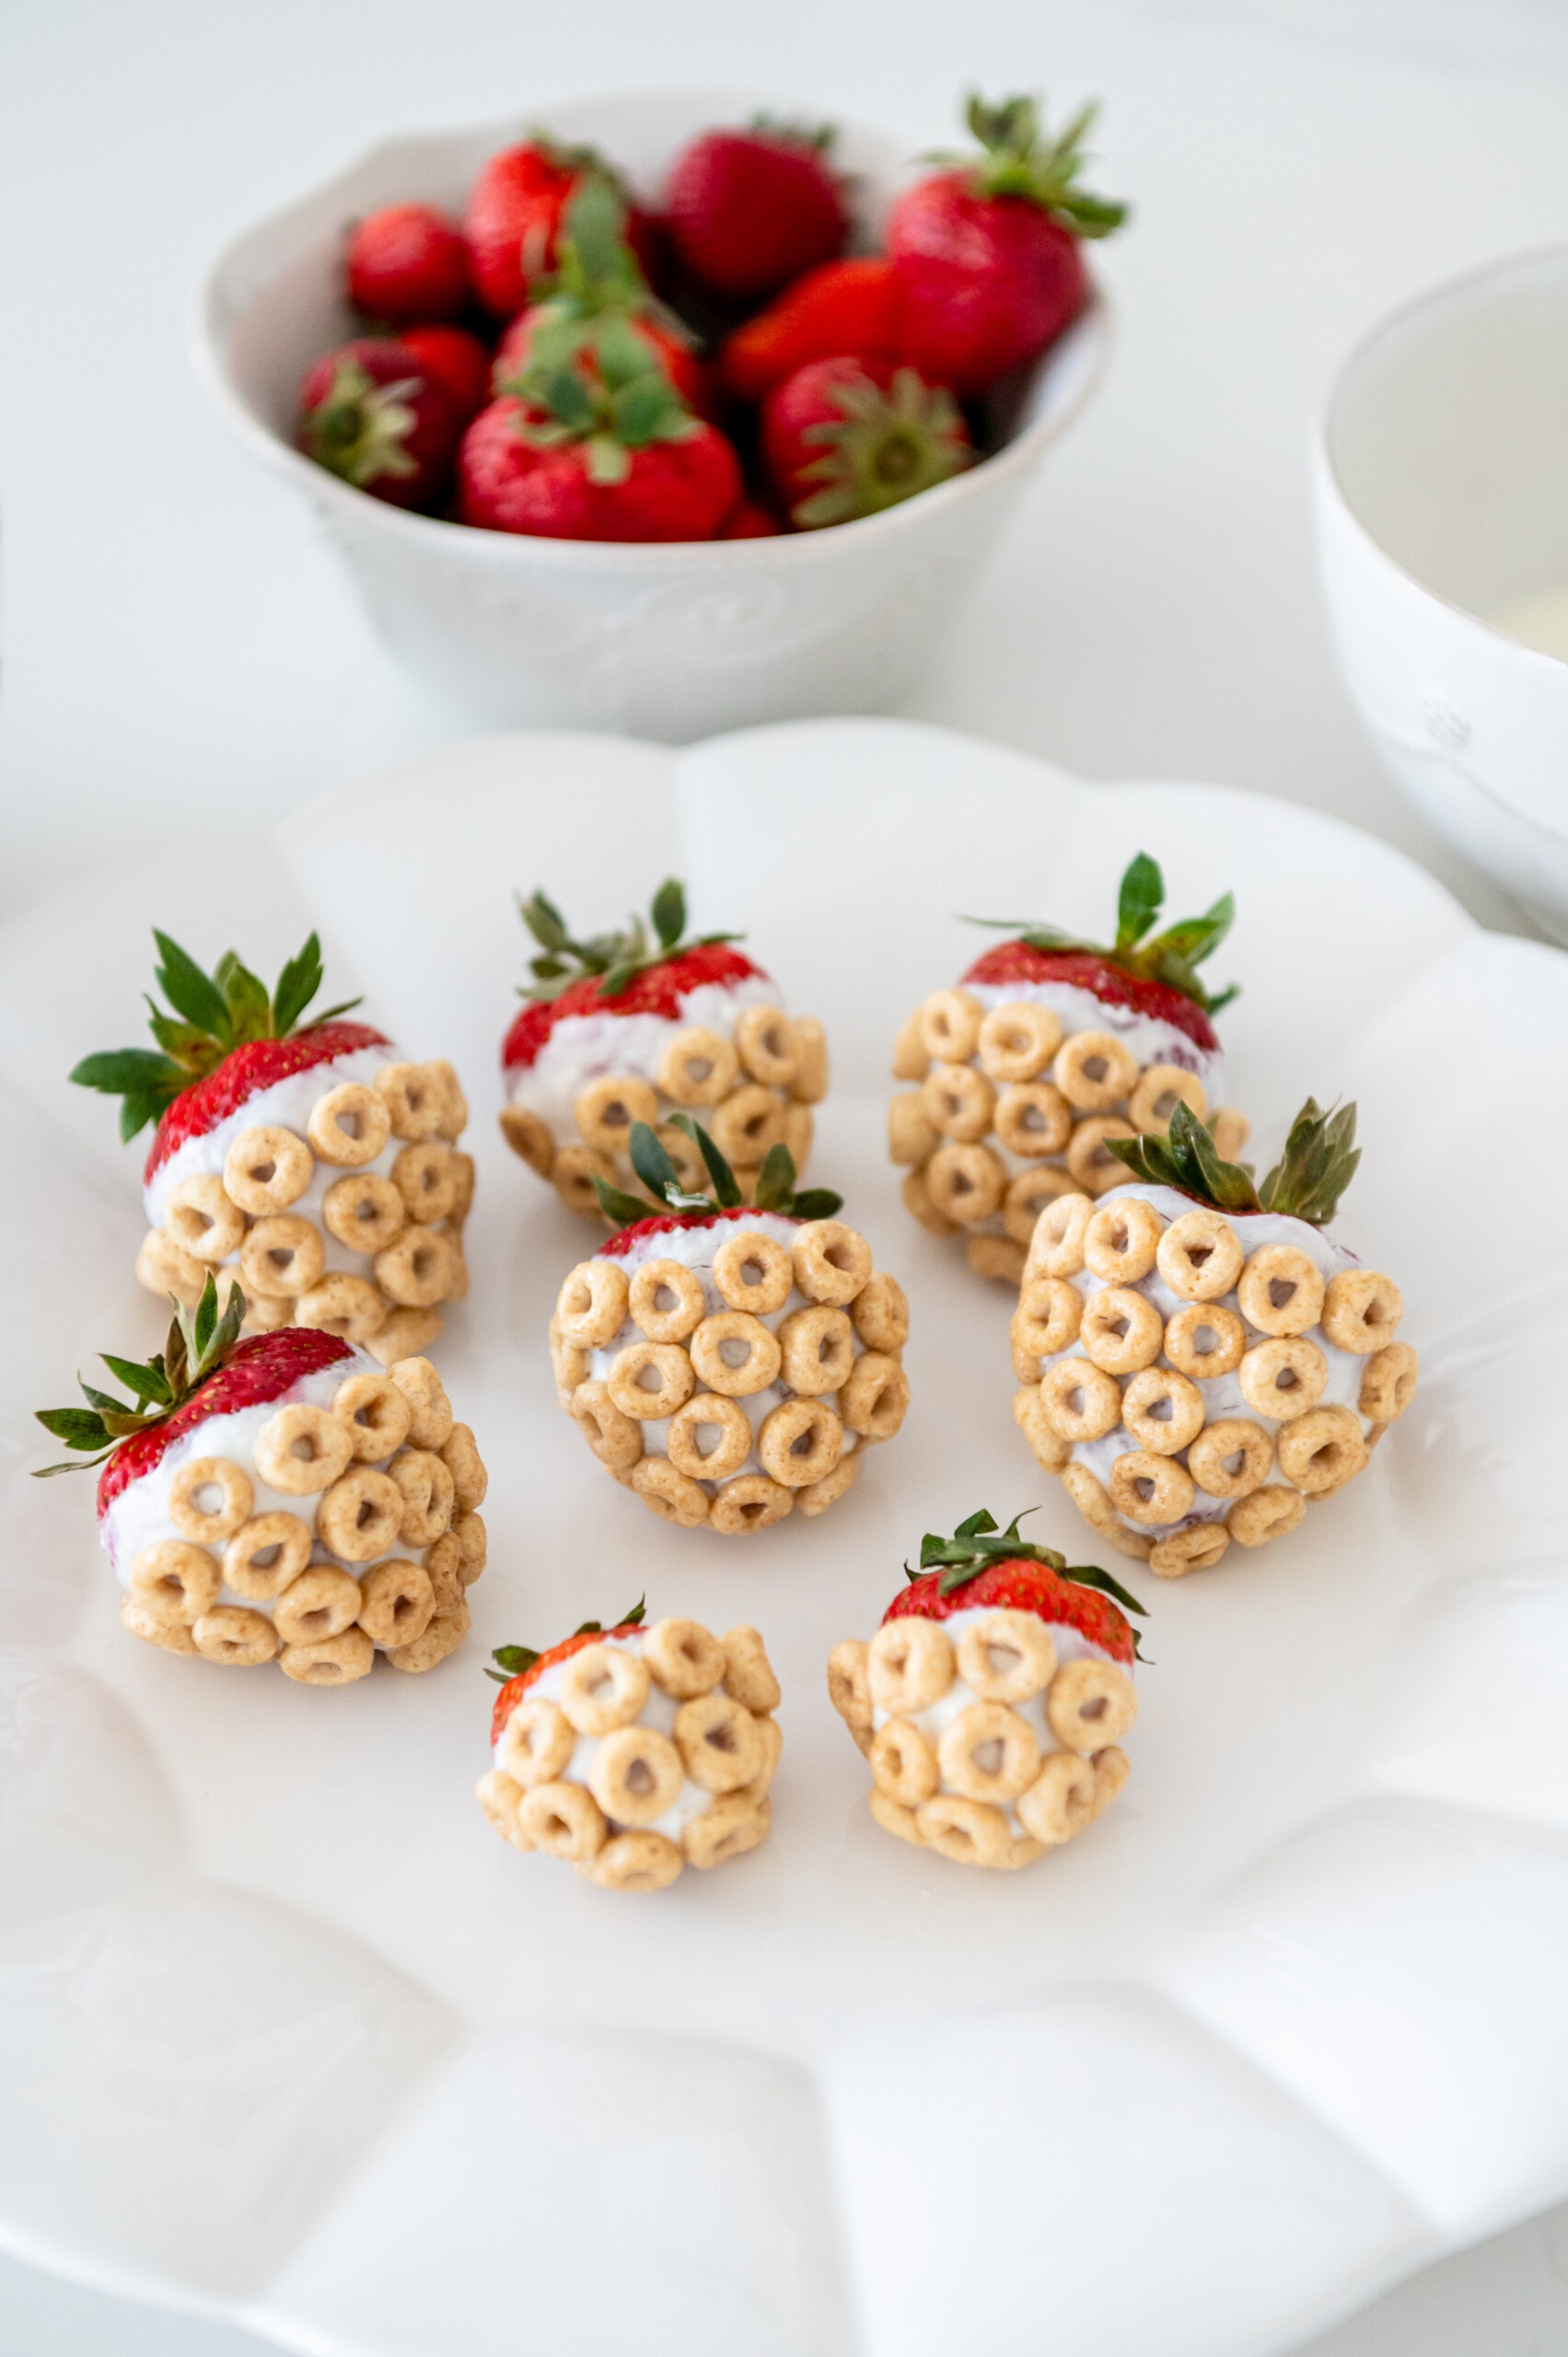 A plate with cheerio and yogurt-covered strawberries. There is a bowl of strawberries in the background.